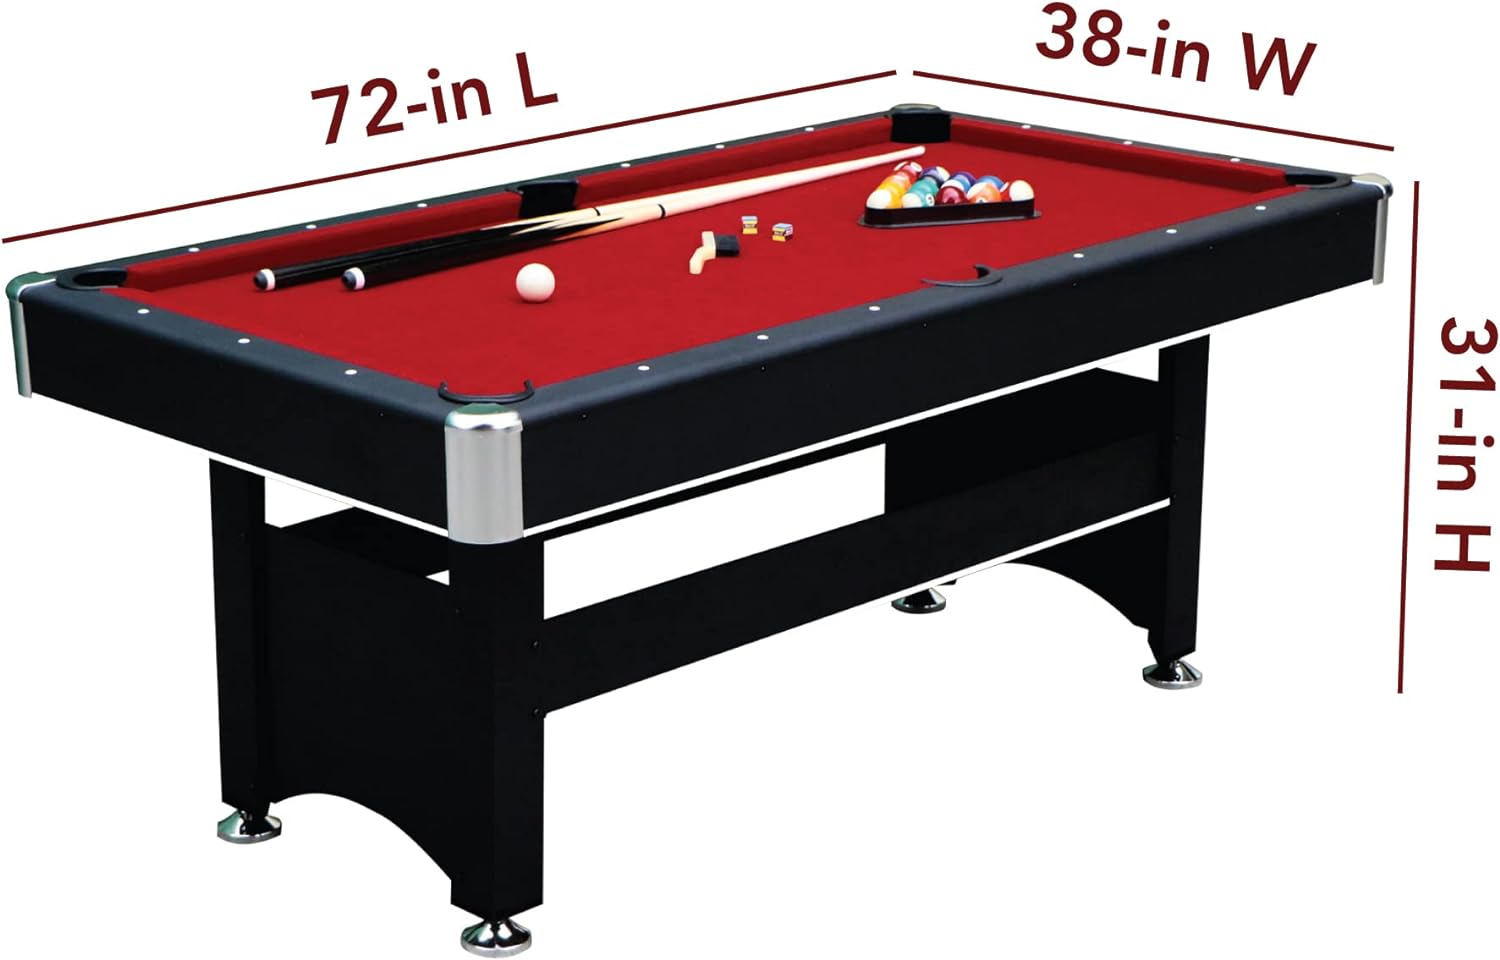 Spartan 6-ft Pool Table with Table Tennis Top - Black with Red Felt - $335